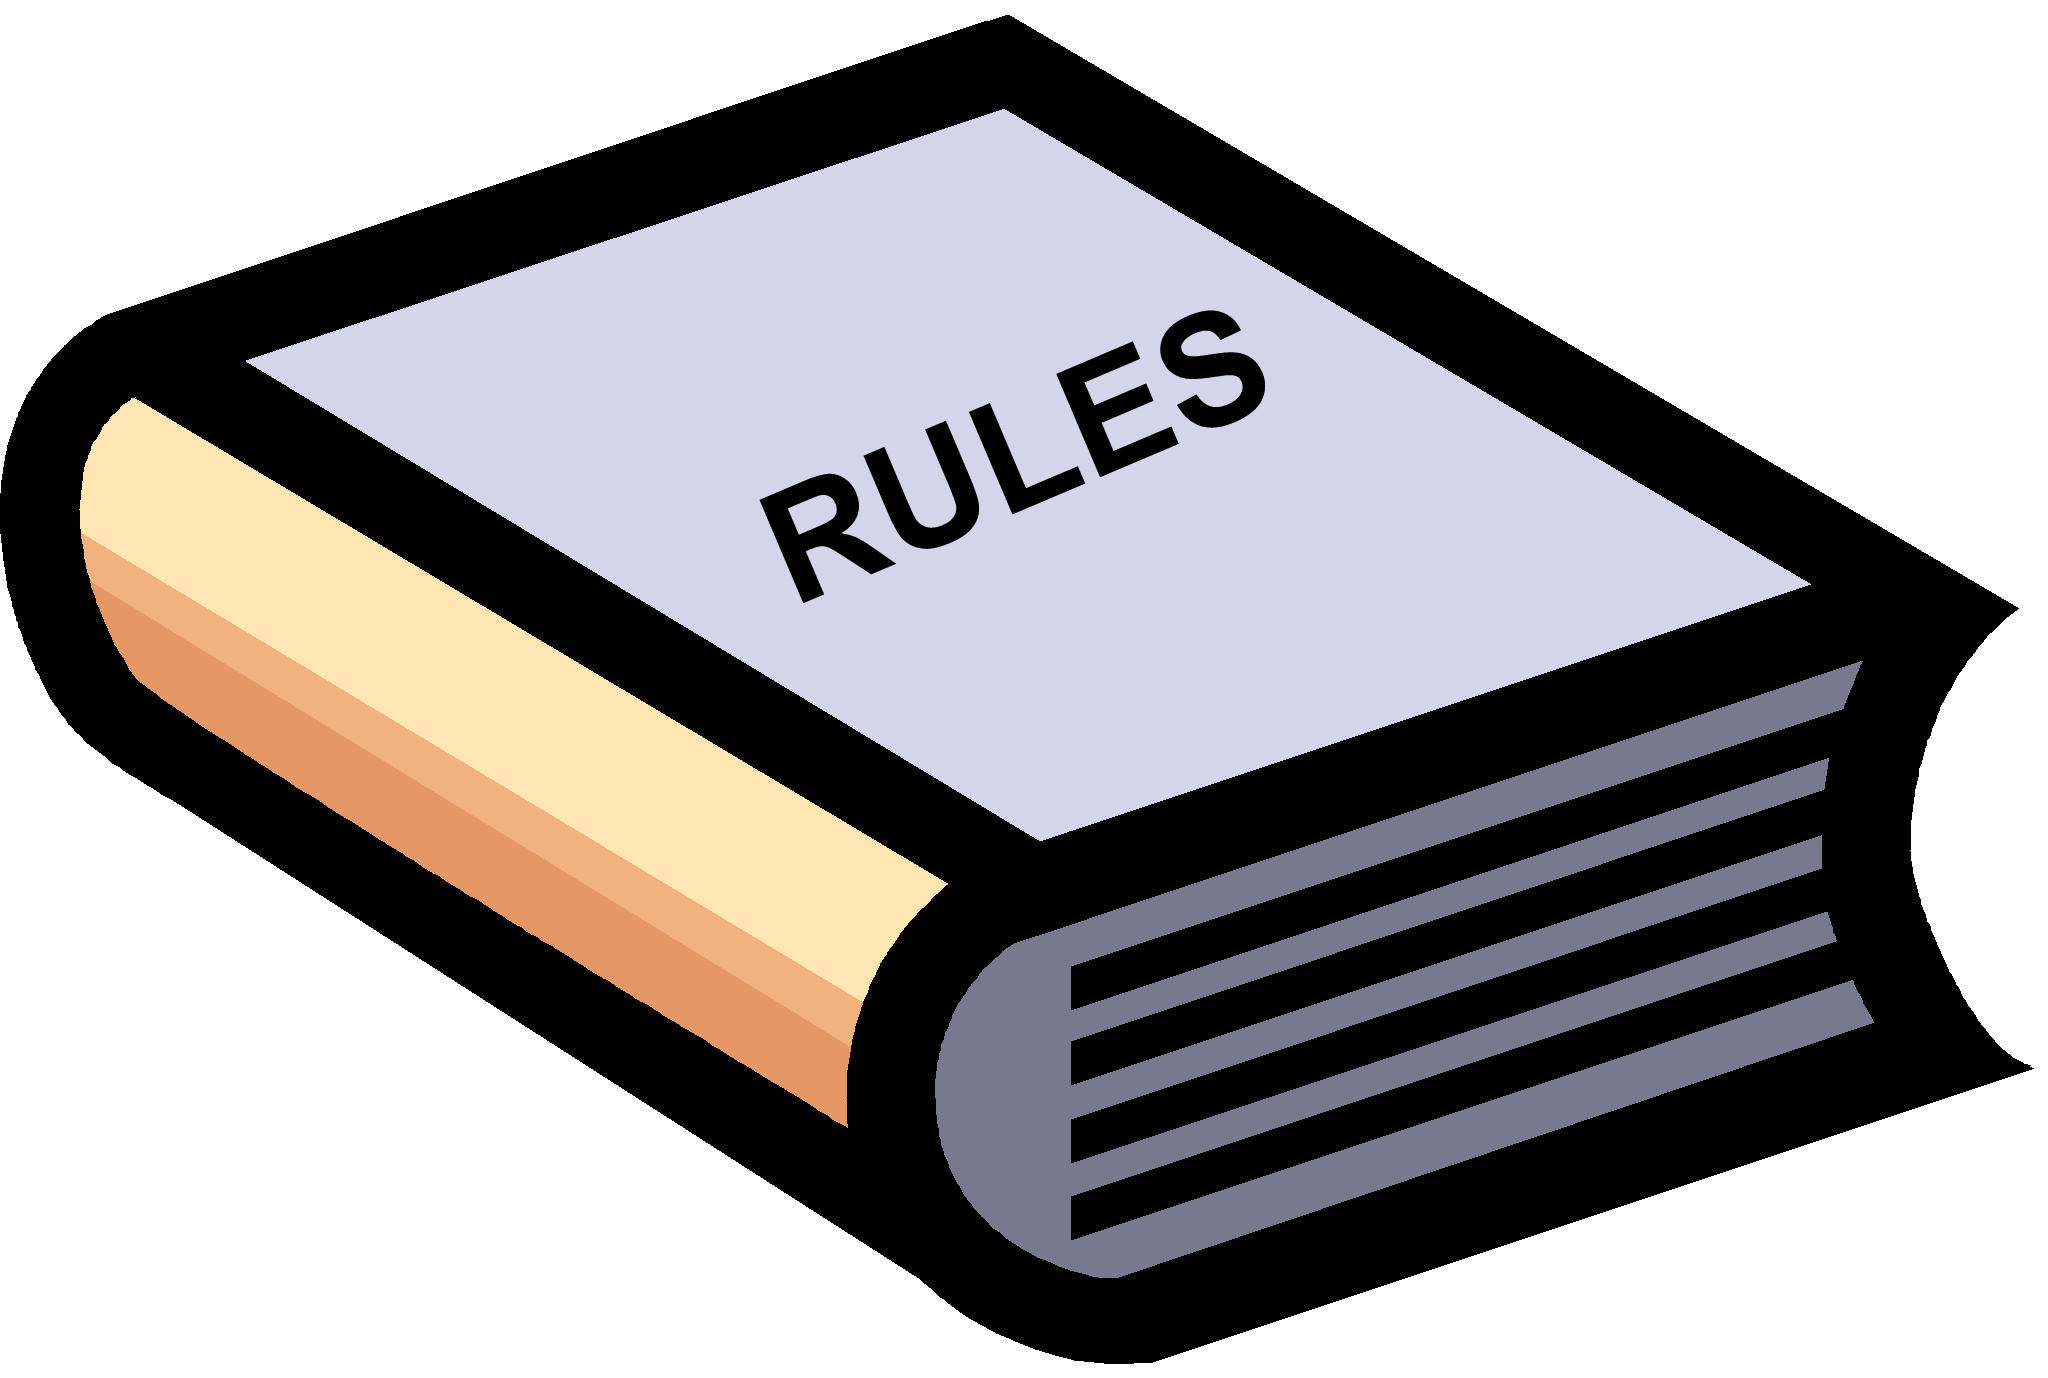 house rules clipart - photo #16